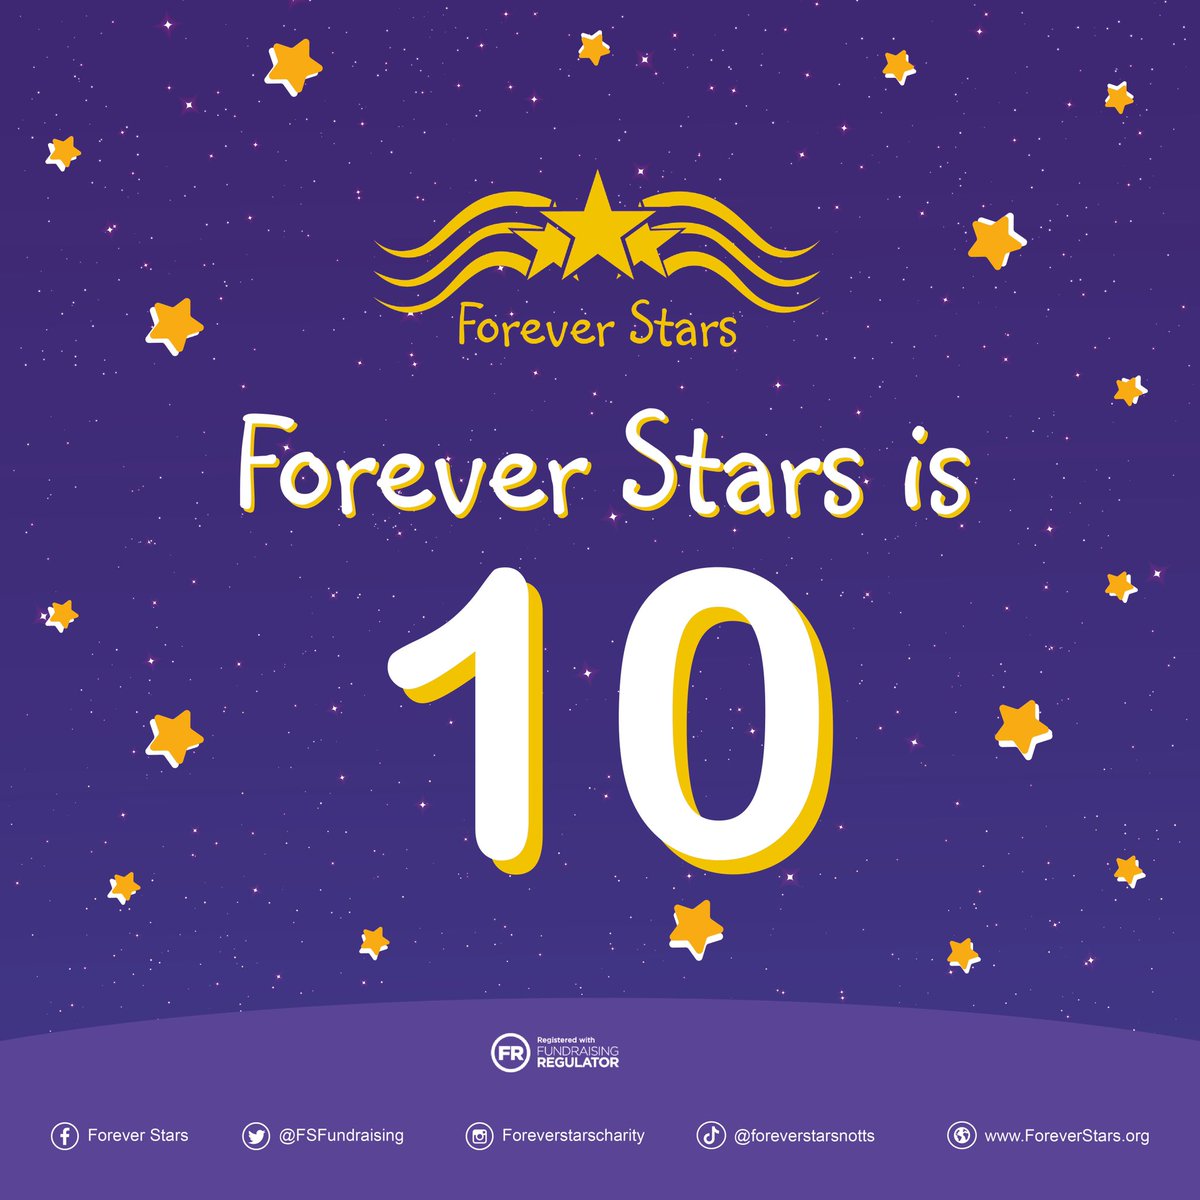 A special day for Forever Stars! Thank you for letting us be part of so many peoples lives over the last 10 years and thank you for all your support to help us achieve our various projects over the last 10 years #babyloss #charity